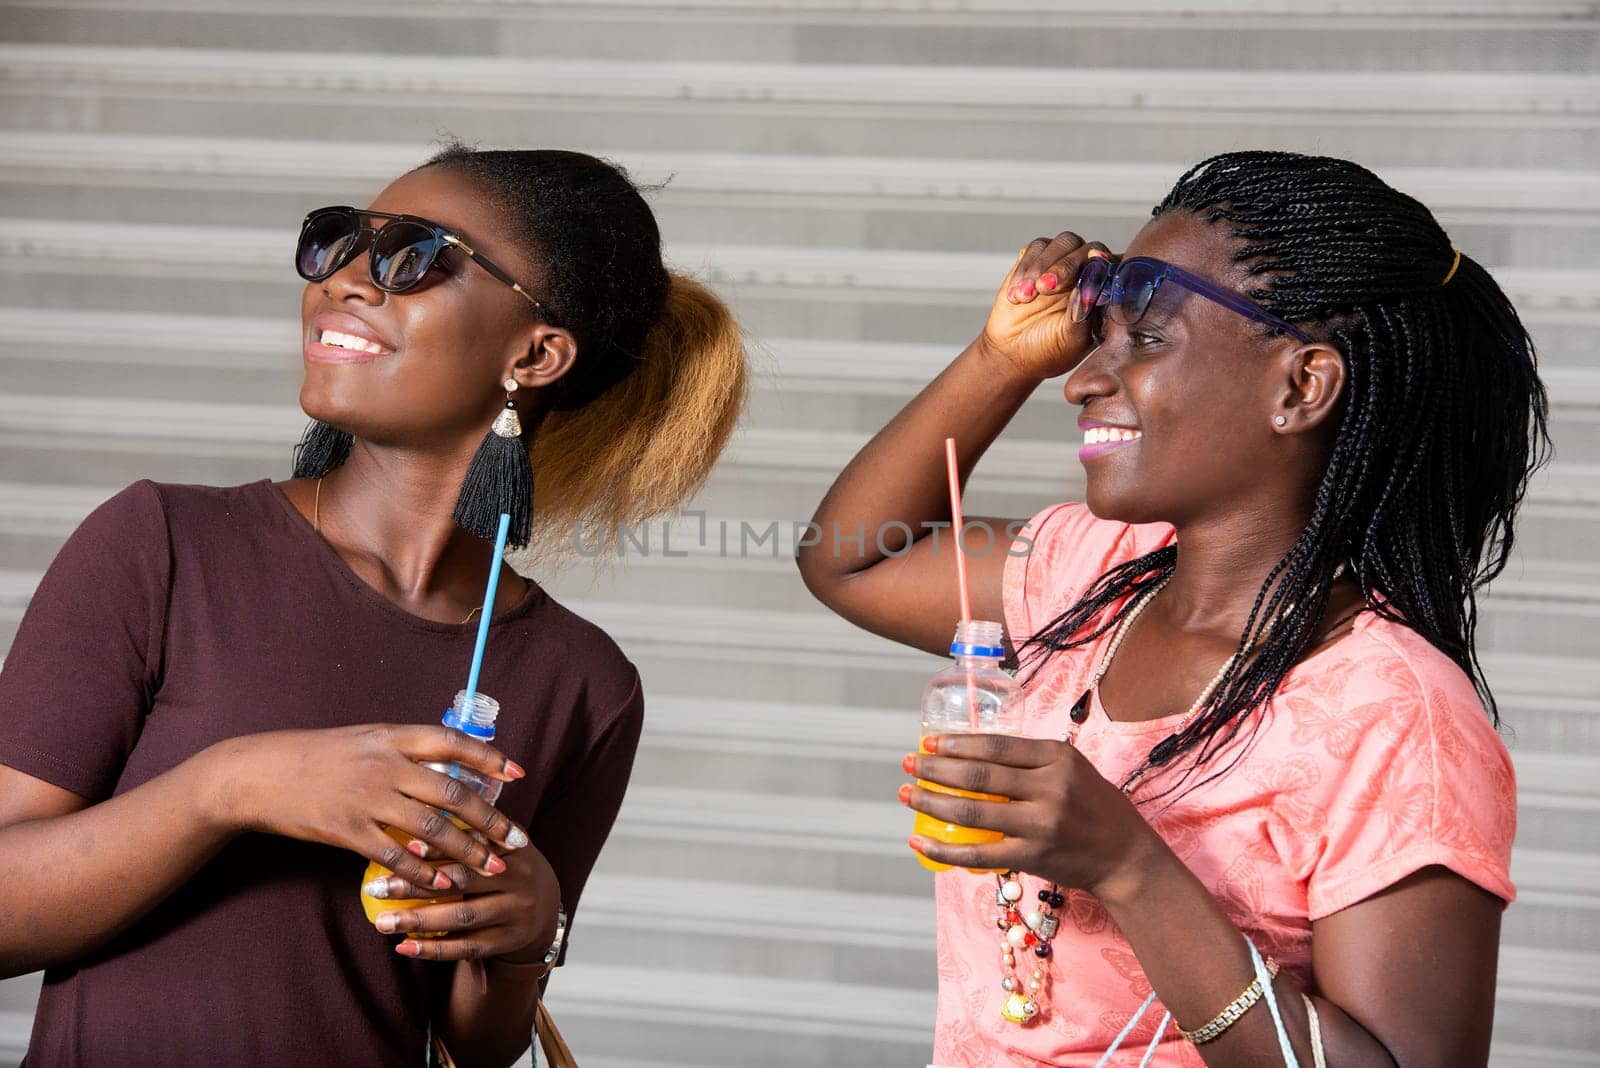 Young girls standing in sunglasses with bottles of fruit juice watching something with shopping bags in hand while smiling.